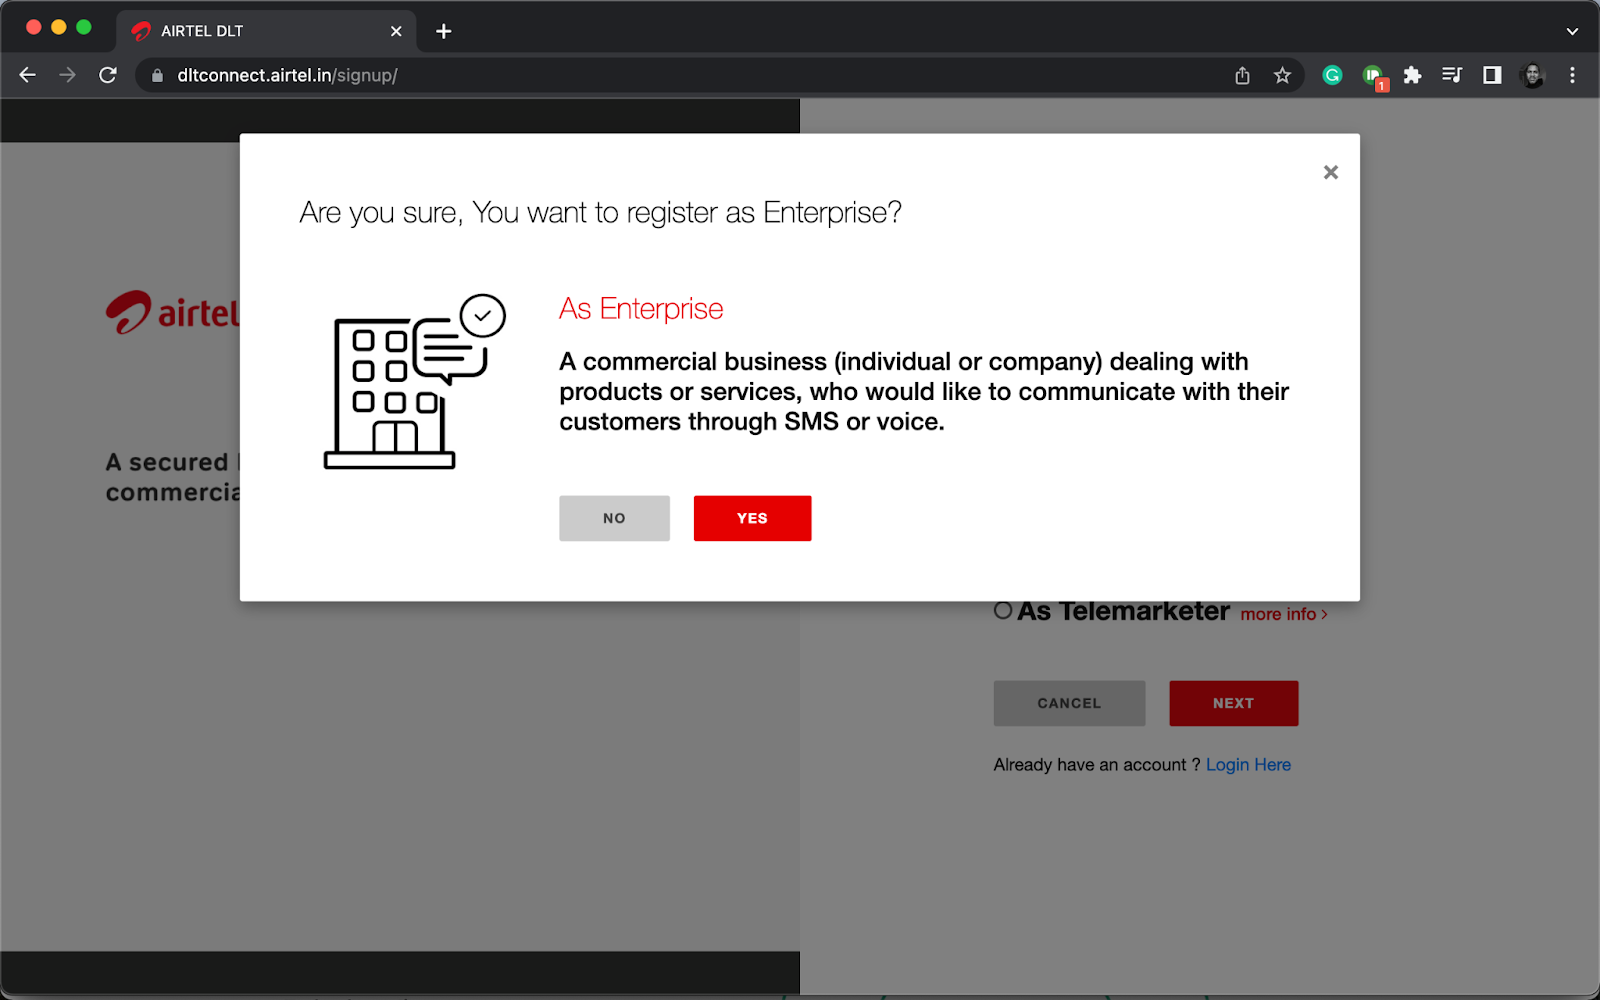 Registration questions on Airtel DLT portal | SMScountry